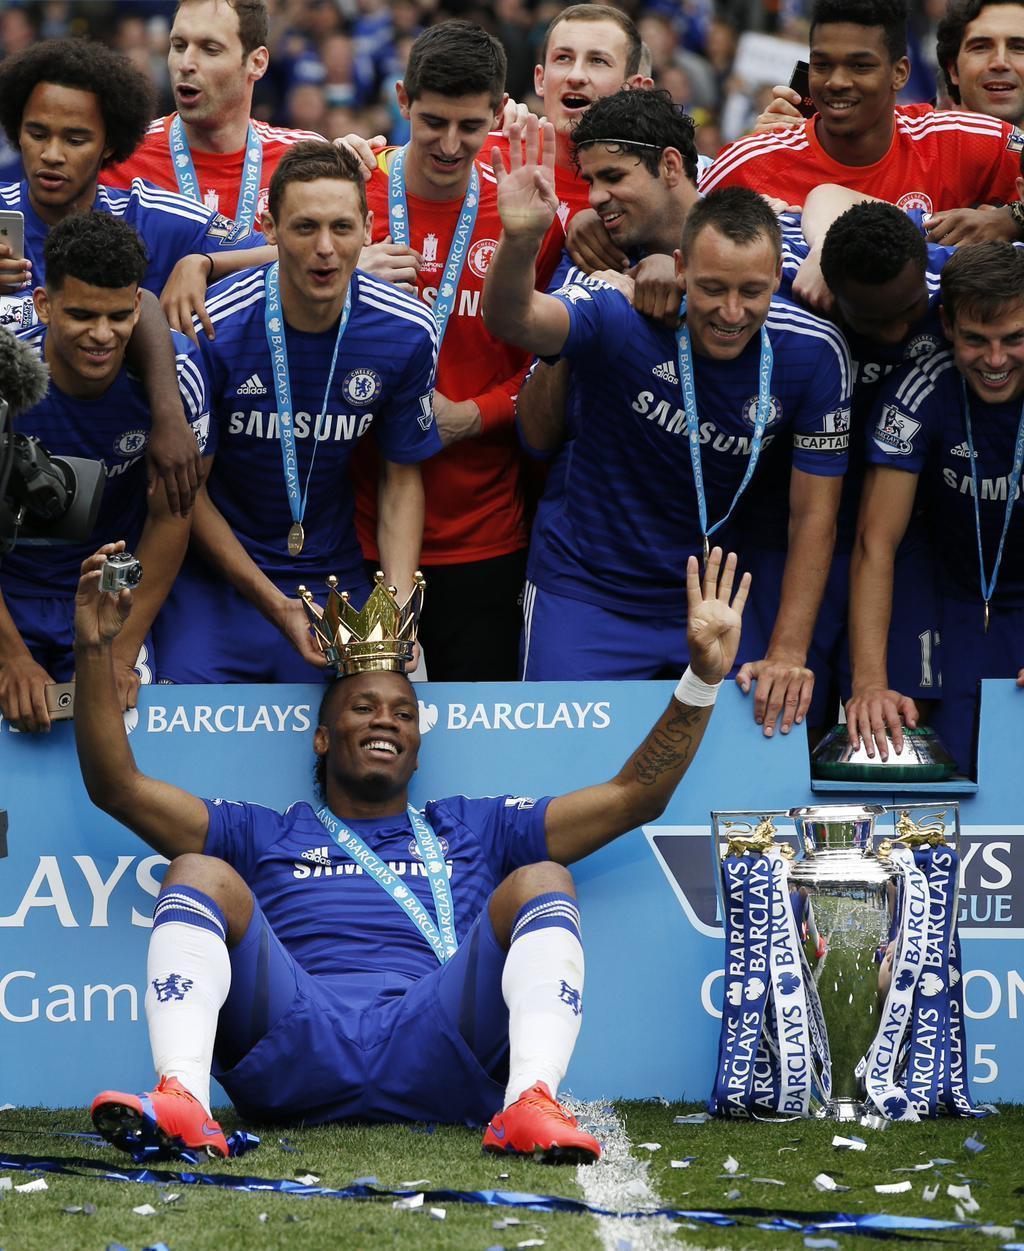 All The Pictures From Chelsea FC Celebrations After Being Crowned